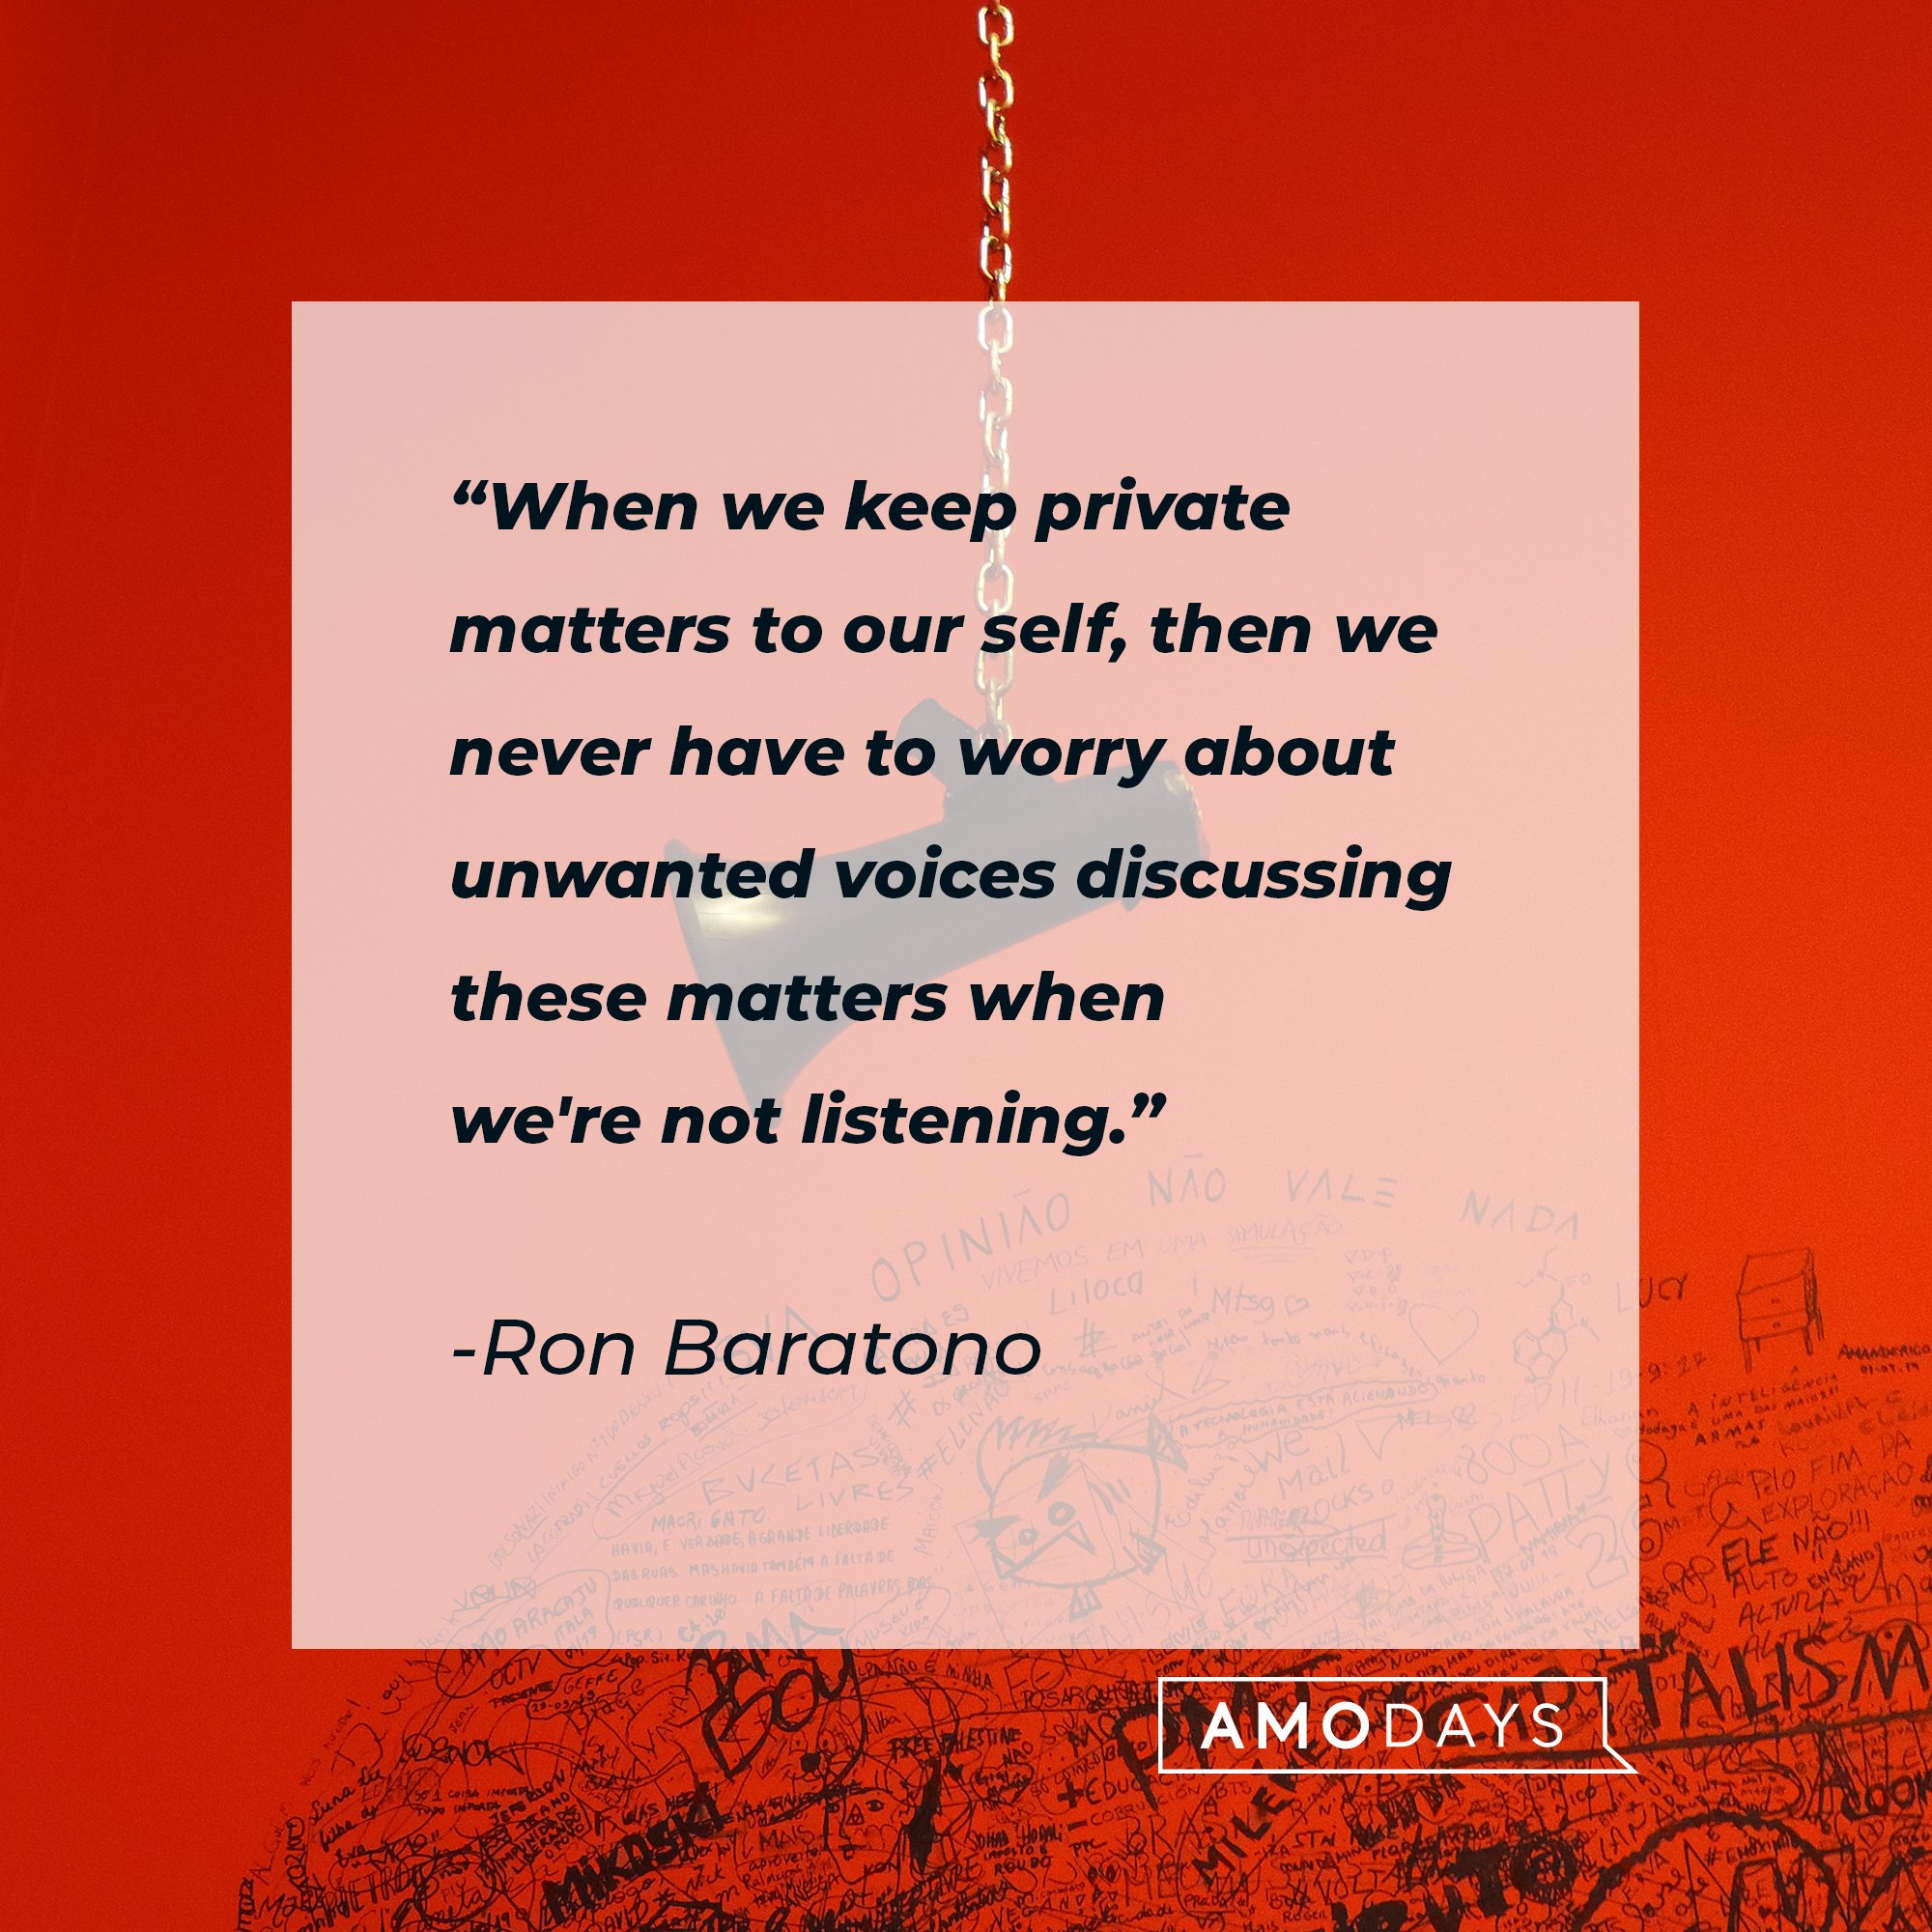 Ron Baratono’s quote: "When we keep private matters to our self, then we never have to worry about unwanted voices discussing these matters when we're not listening." | Image: AmoDays   